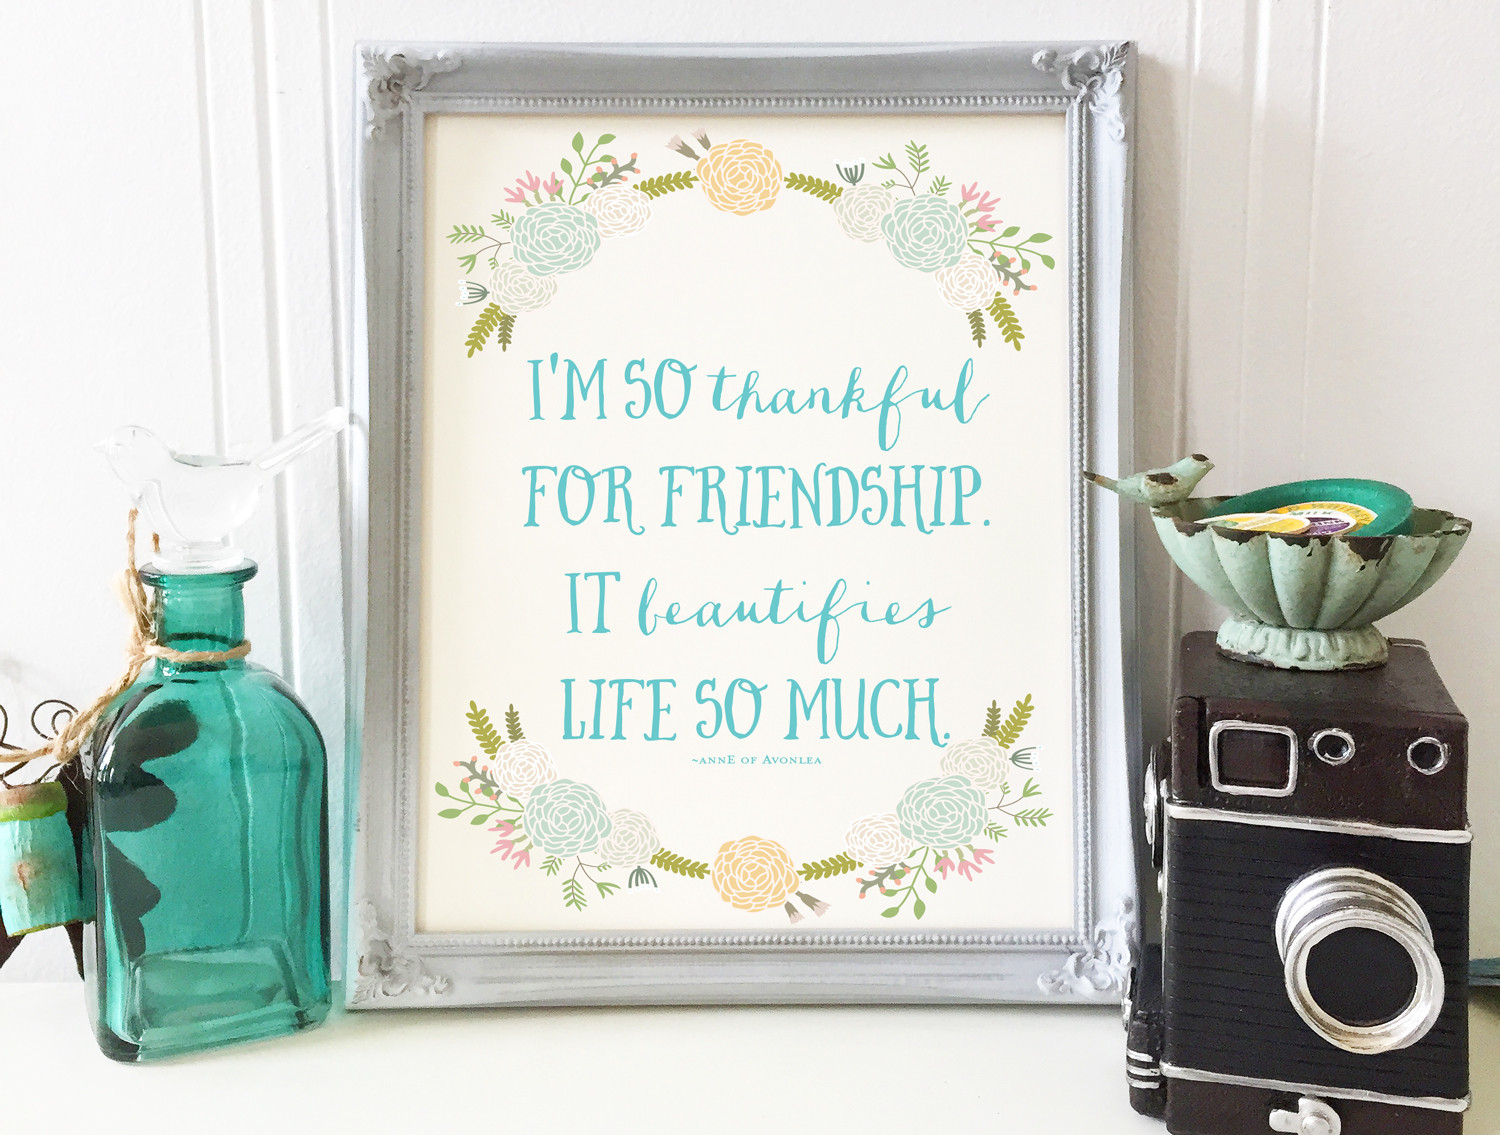 Anne Of Green Gables Friendship Quotes
 Anne of Green Gables Gift Nursery and Children s Art